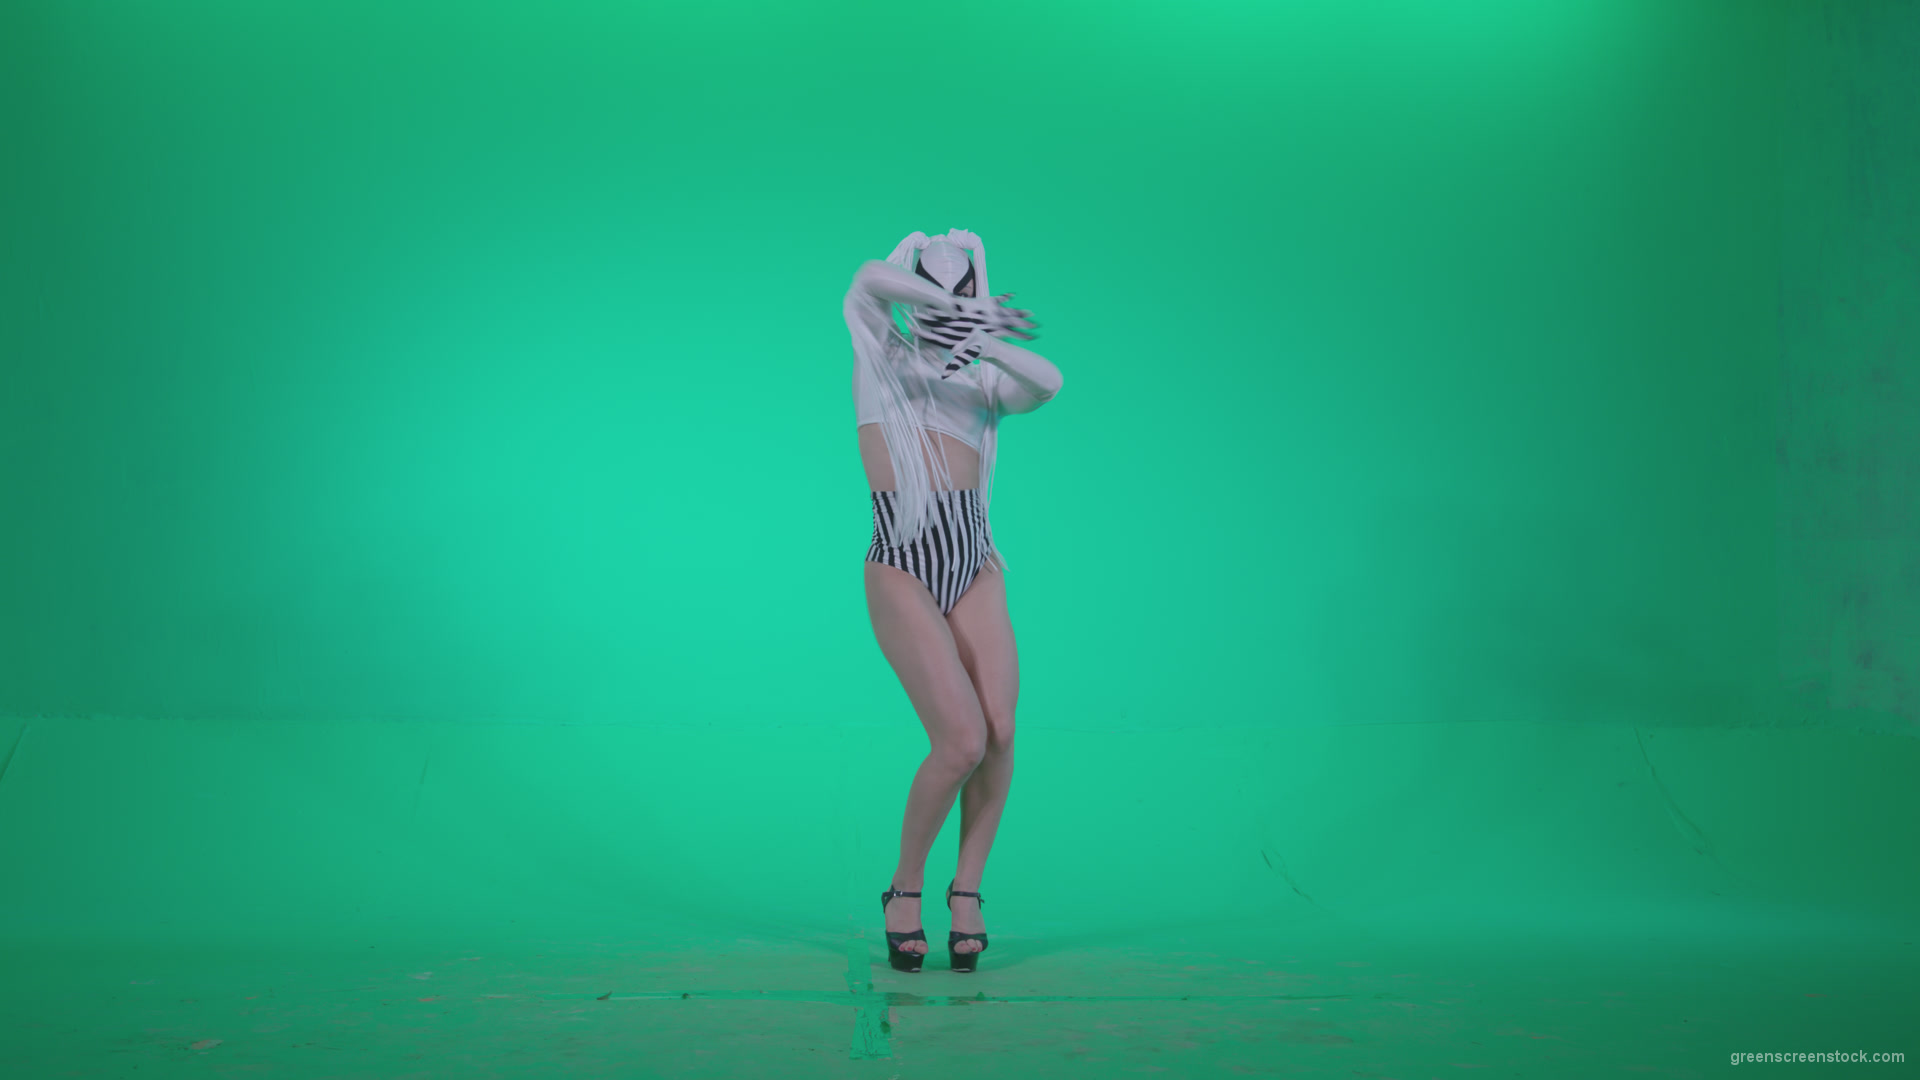 Go-go-Dancer-with-Latex-Top-t2-Green-Screen-Video-Footage_001 Green Screen Stock